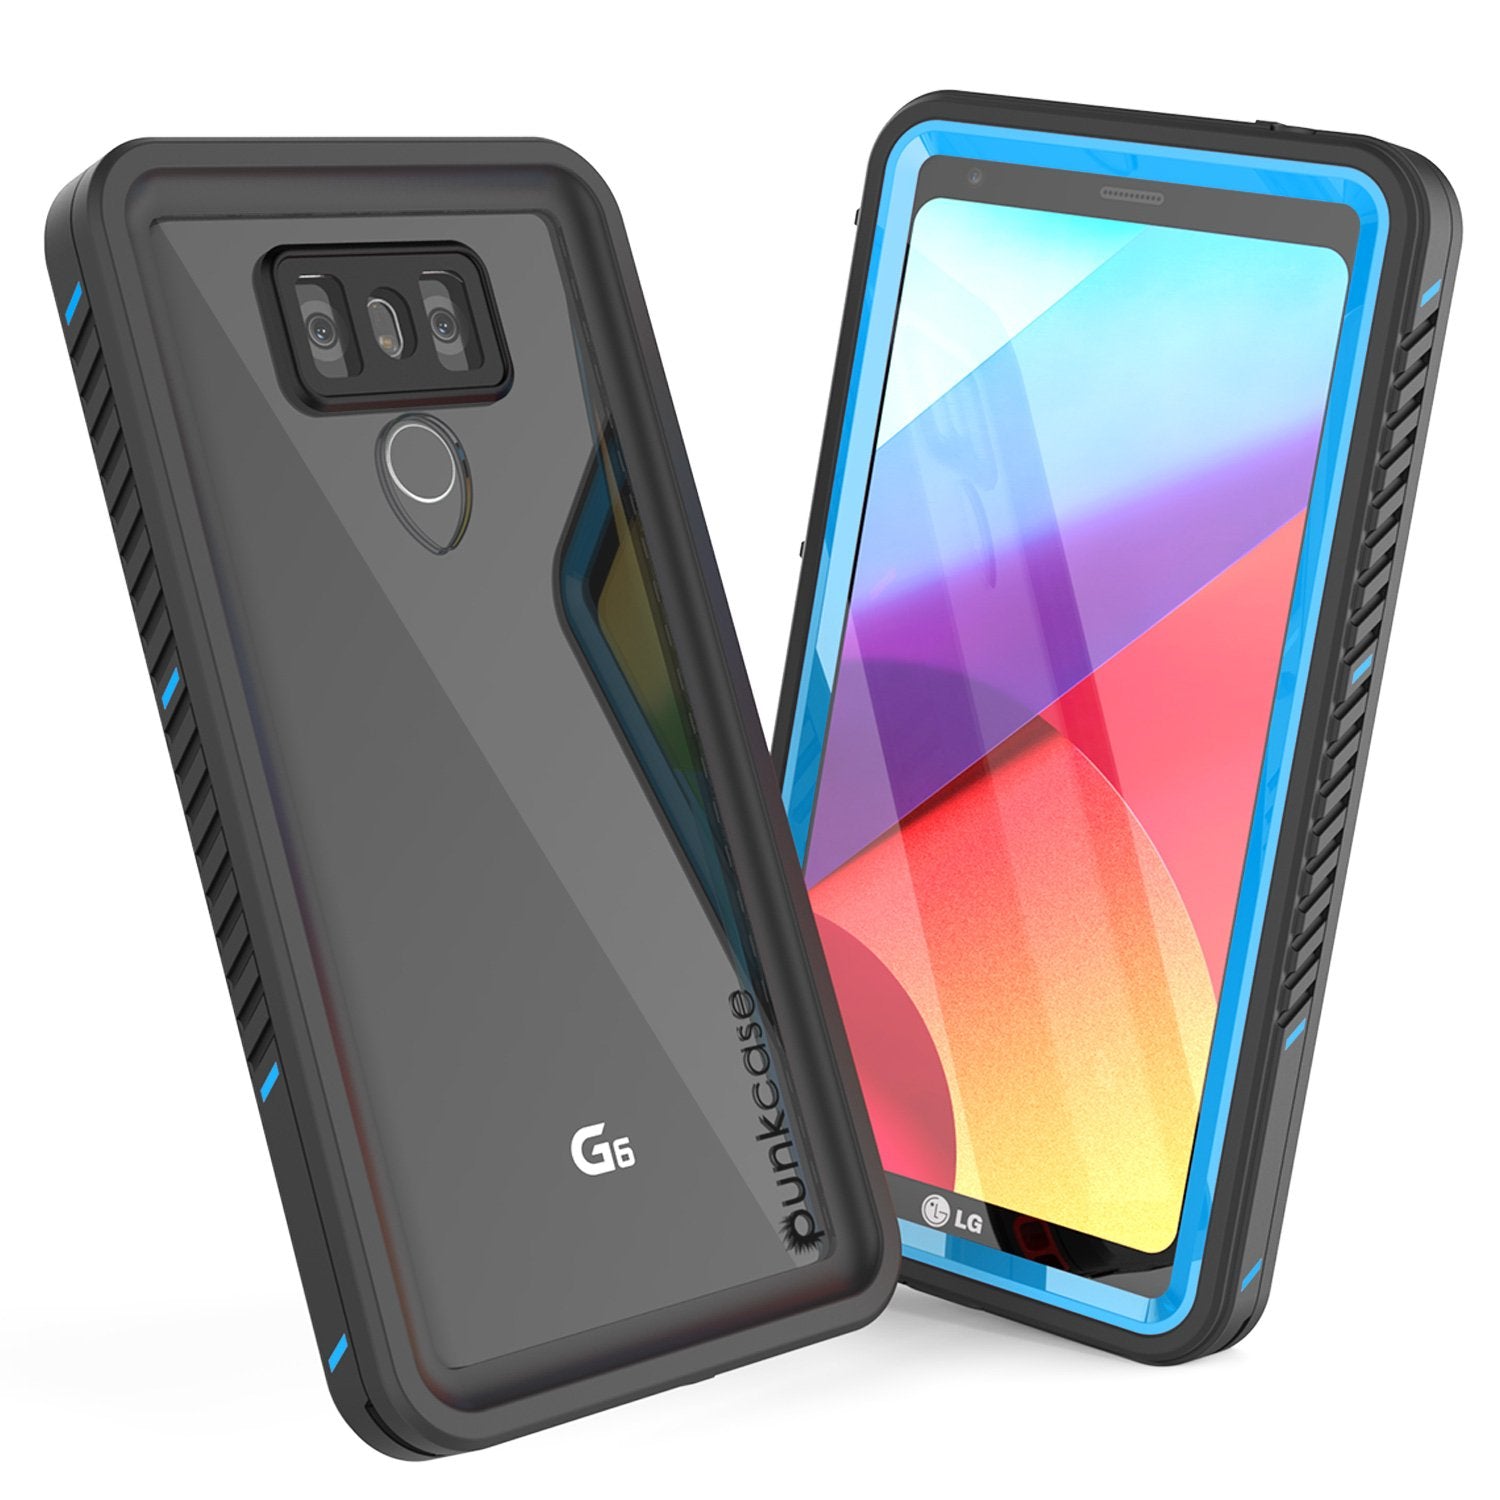 LG G6 Waterproof Case, Punkcase [Extreme Series] [Slim Fit] [IP68 Certified] [Shockproof] [Snowproof] [Dirproof] Armor Cover W/ Built In Screen Protector for LG G6 [BLUE] - PunkCase NZ